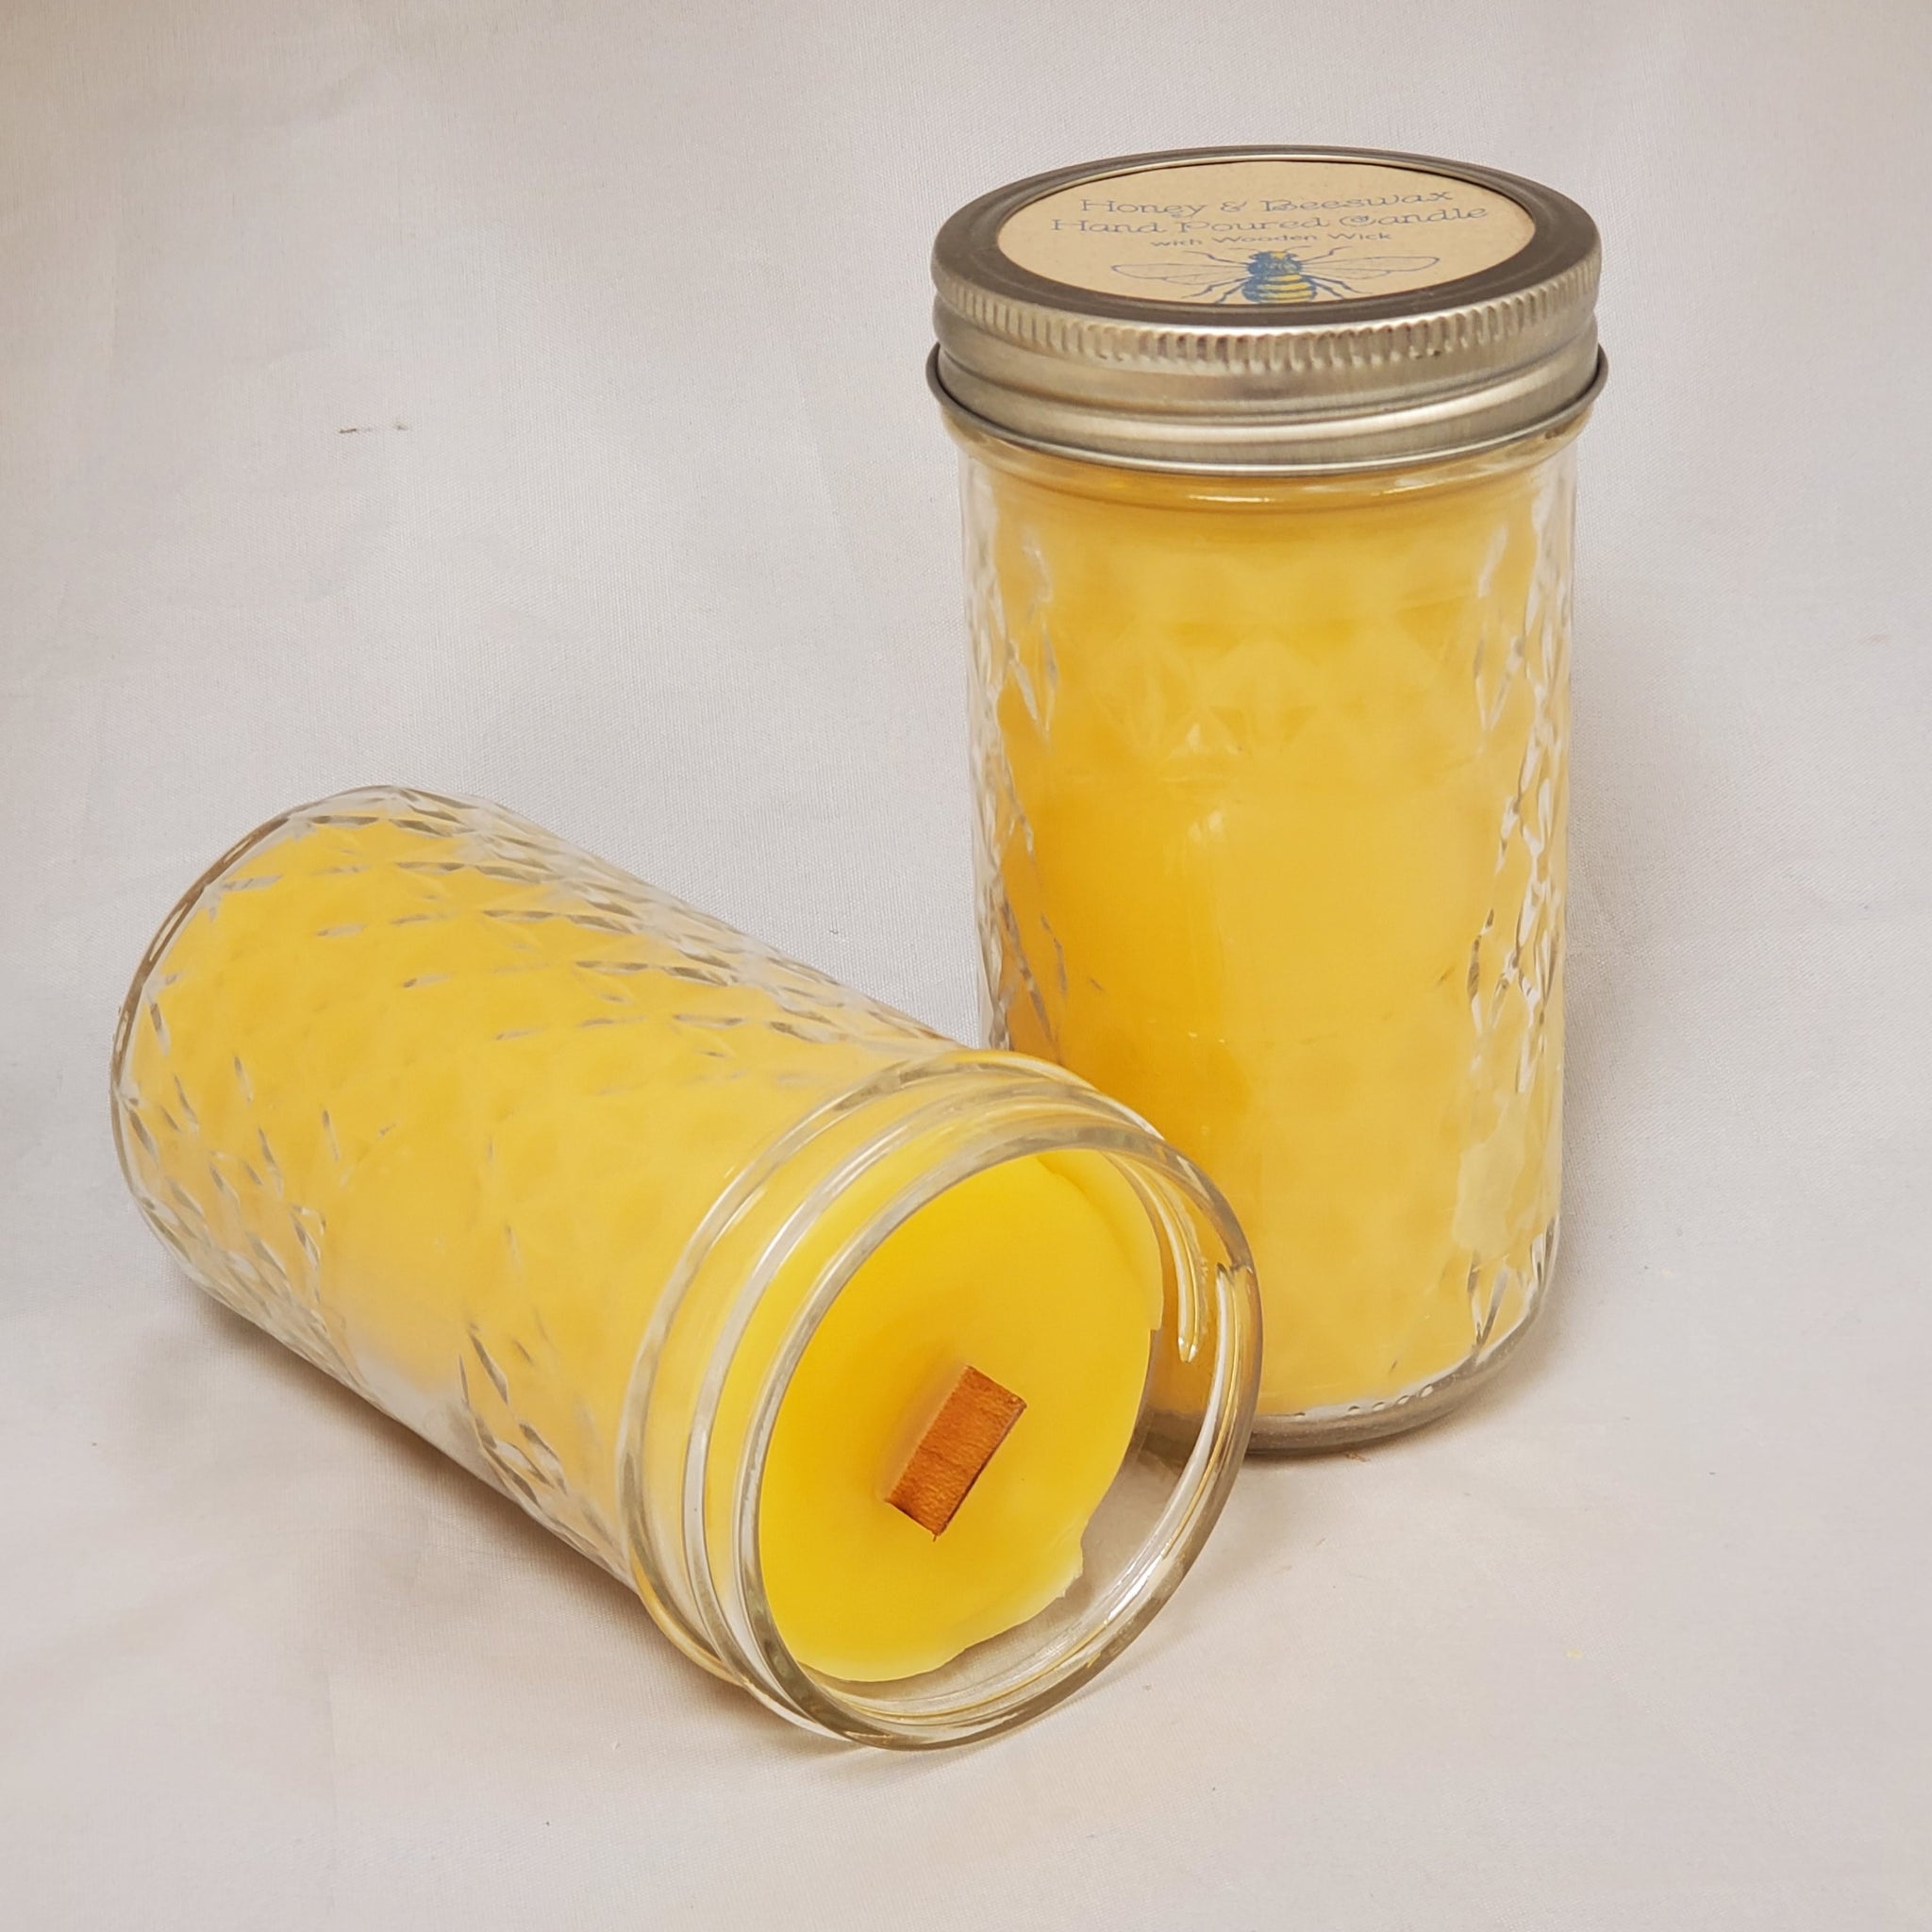 Tumbler Beeswax Candle with Wooden Wick - Just The Bees